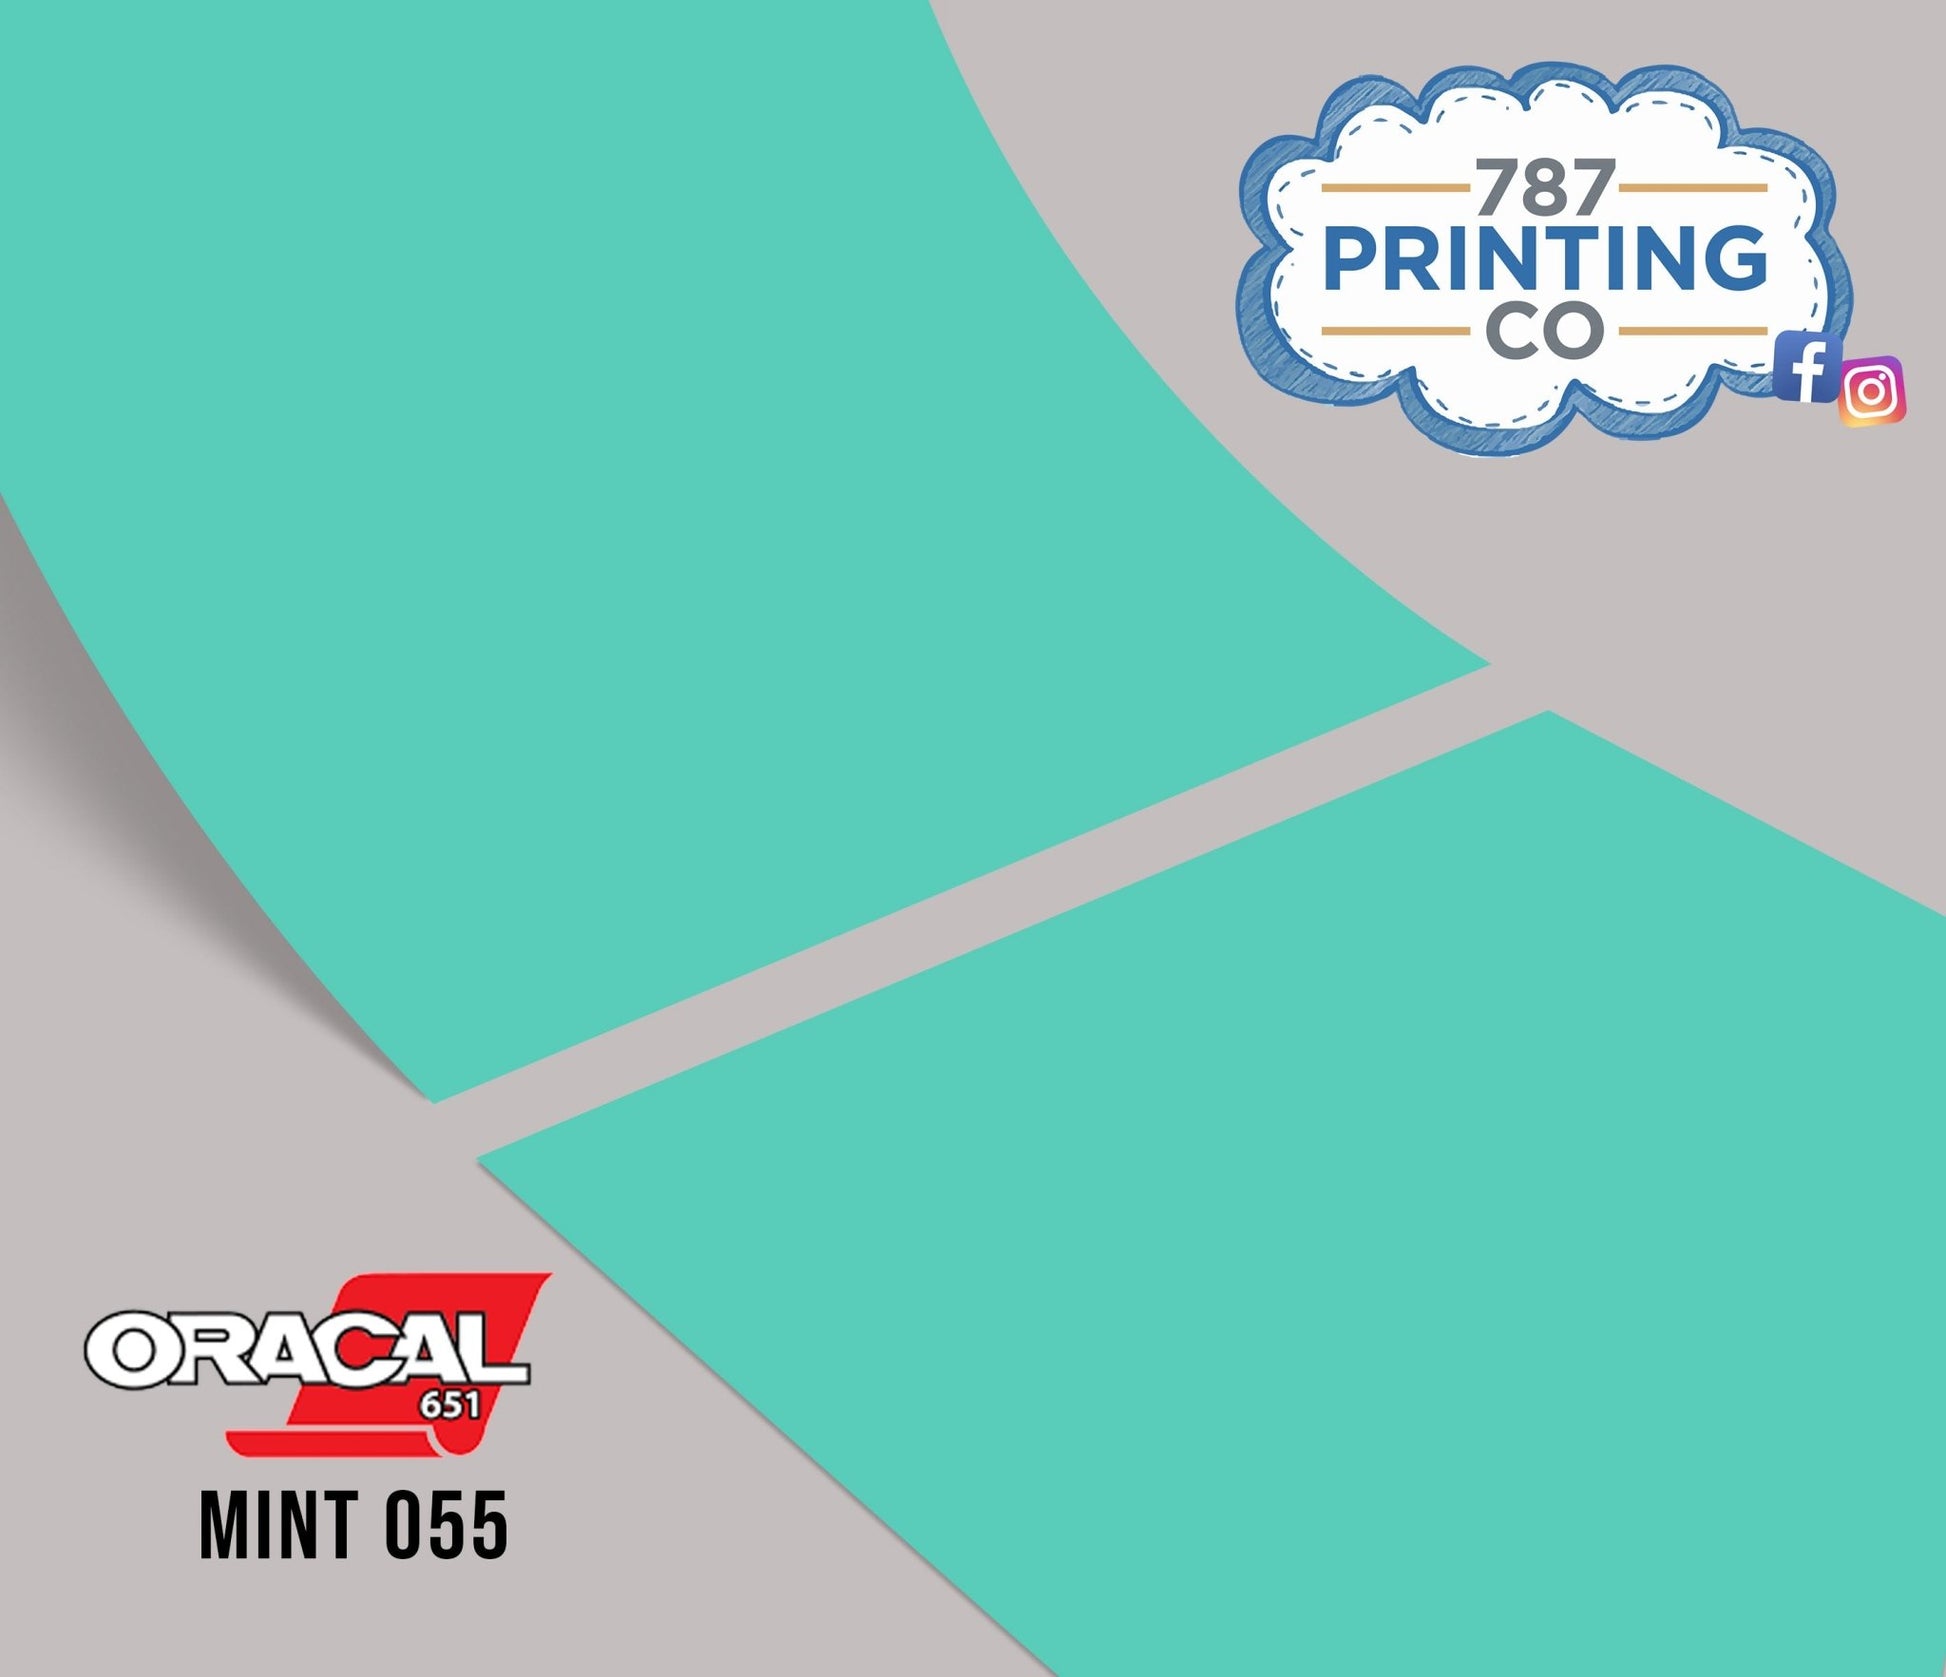 Oracal 651 Gloss Finish - Various Colors - 787 Printing Co.